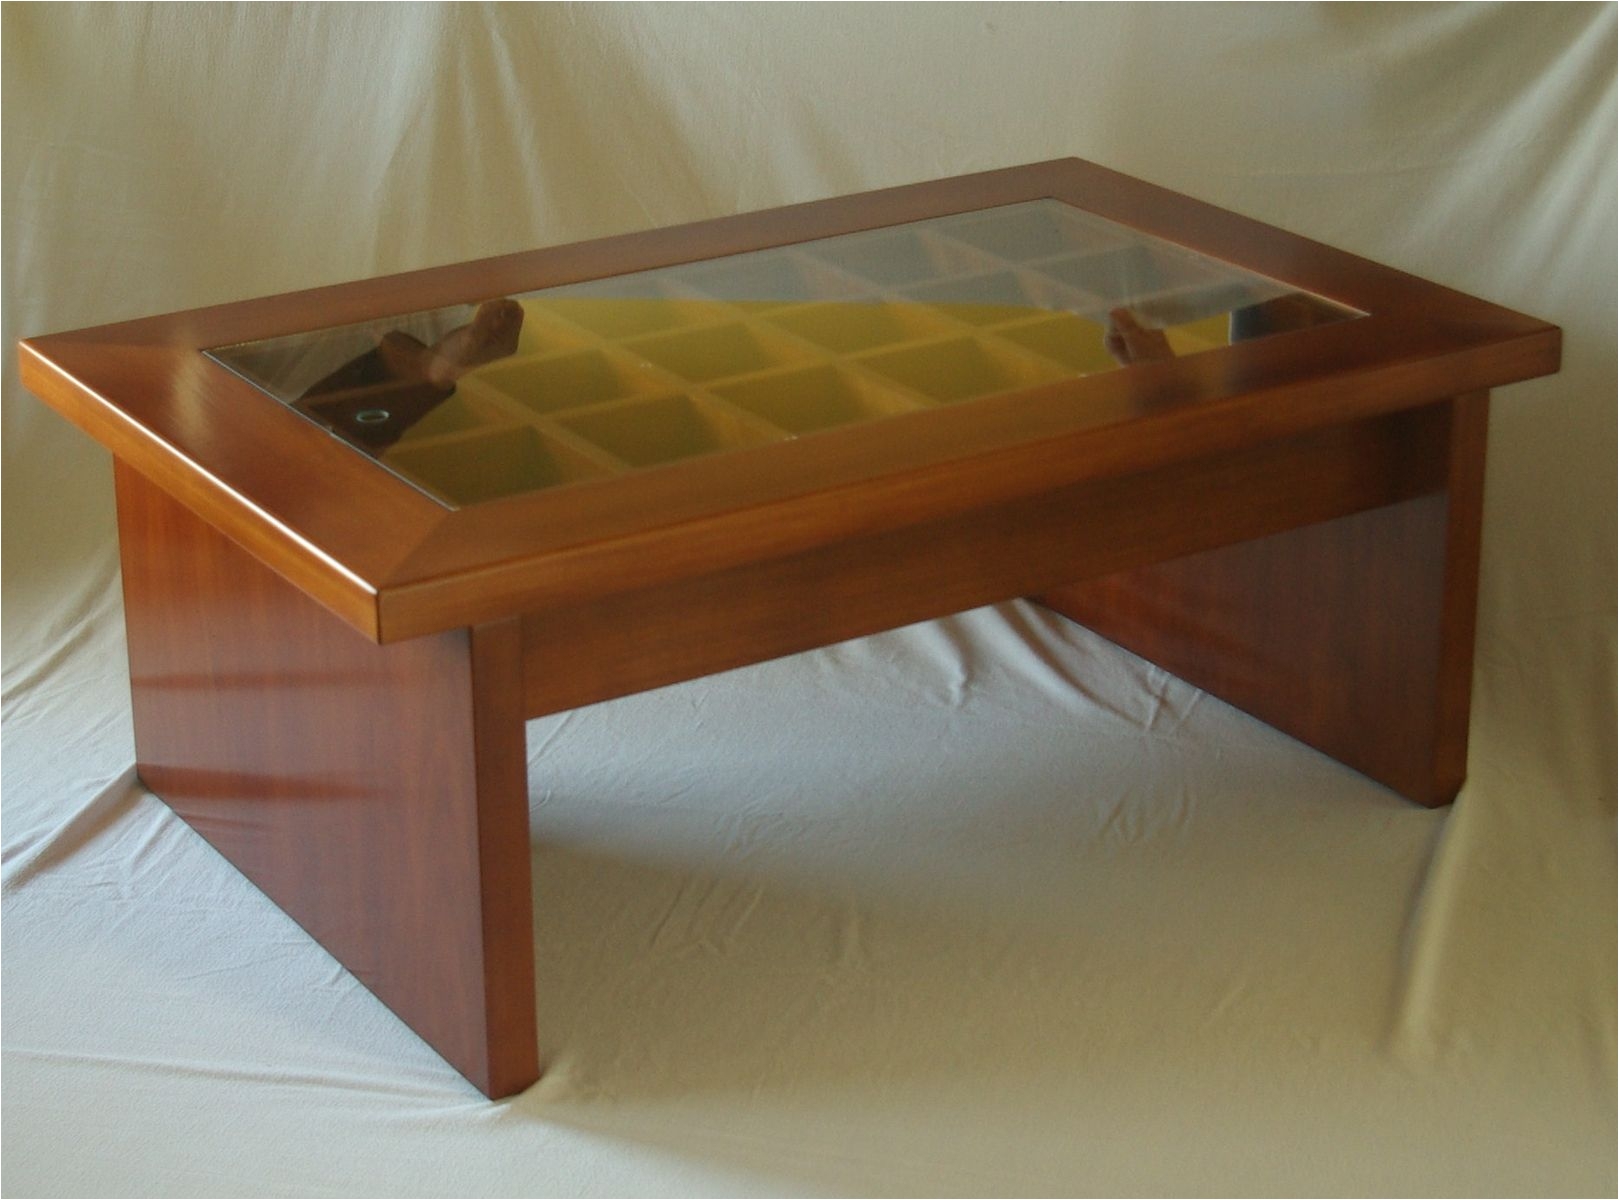 Display Case Coffee Table 15 Glass Display Case Coffee Table Gallery